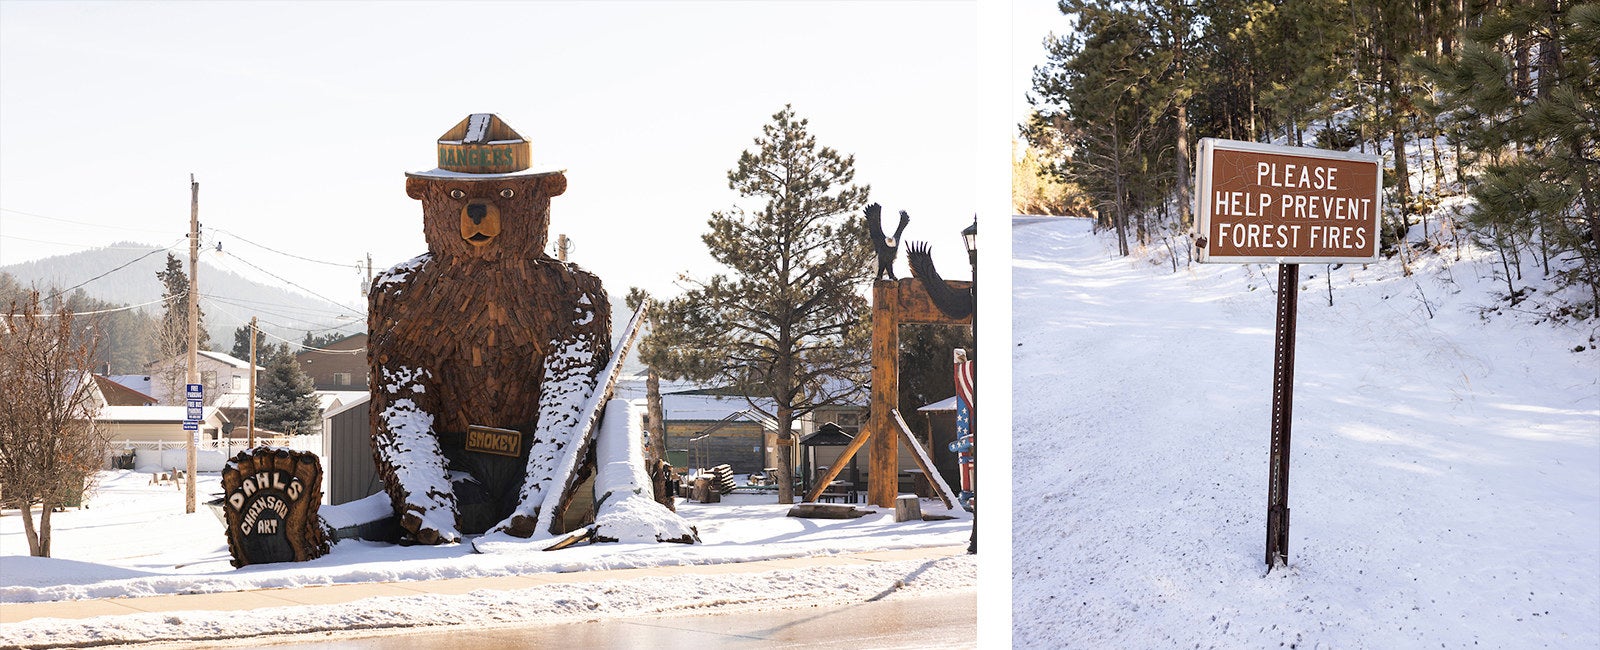 A towering sculpture of Smokey The Bear sitting in the snow and created from scraps of wood, wearing a wooden hat that says “Rangers” in Hill City, South Dakota next to a sign that says “Please help prevent forest fires”